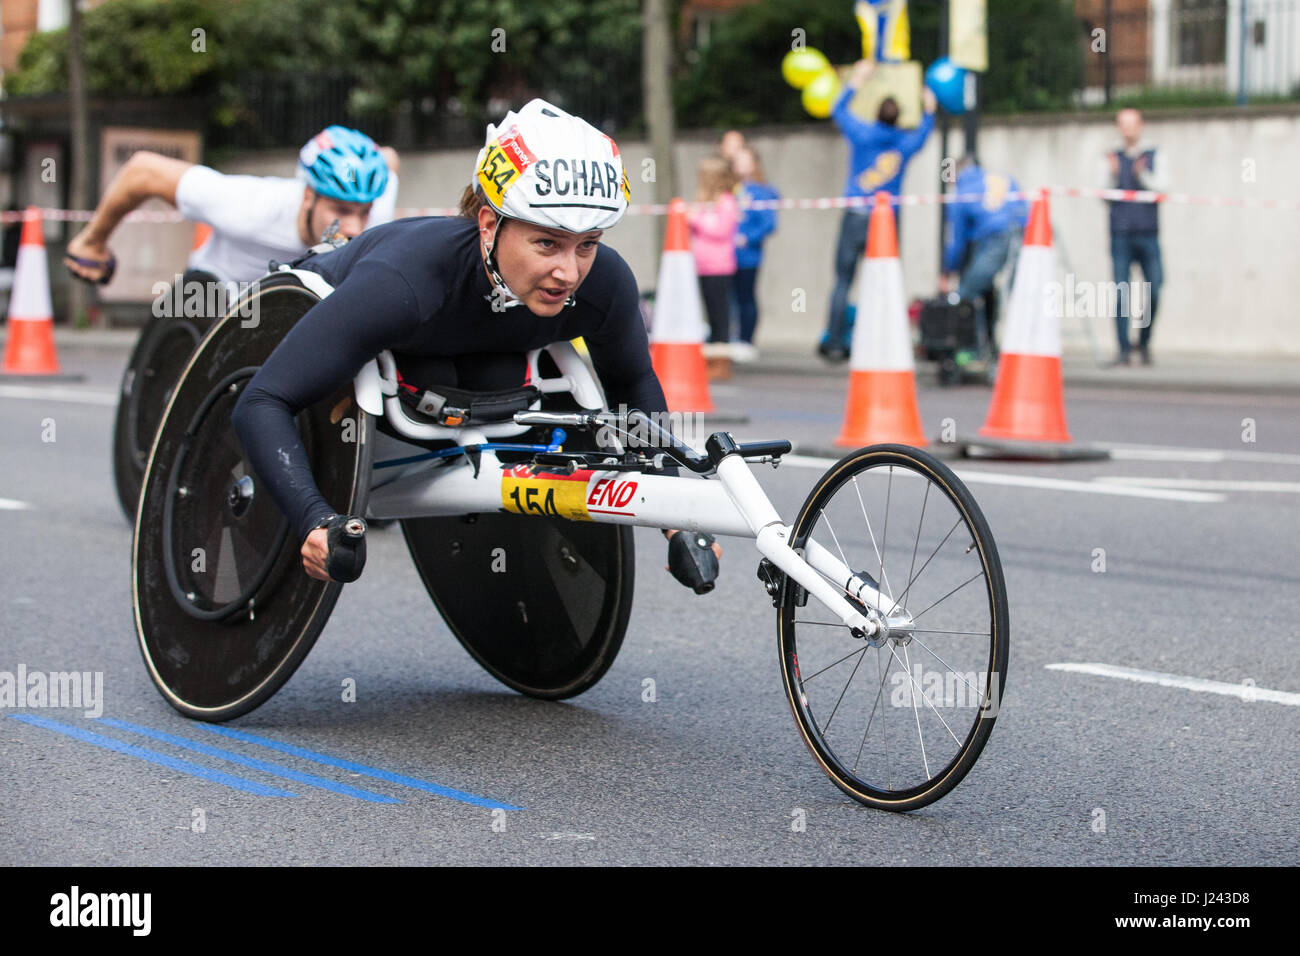 London, UK. 23rd April, 2017. Manuela Schar of Switzerland, who won the women's event, competes in the in the T53/T54 event for wheelchair racers with Stock Photo